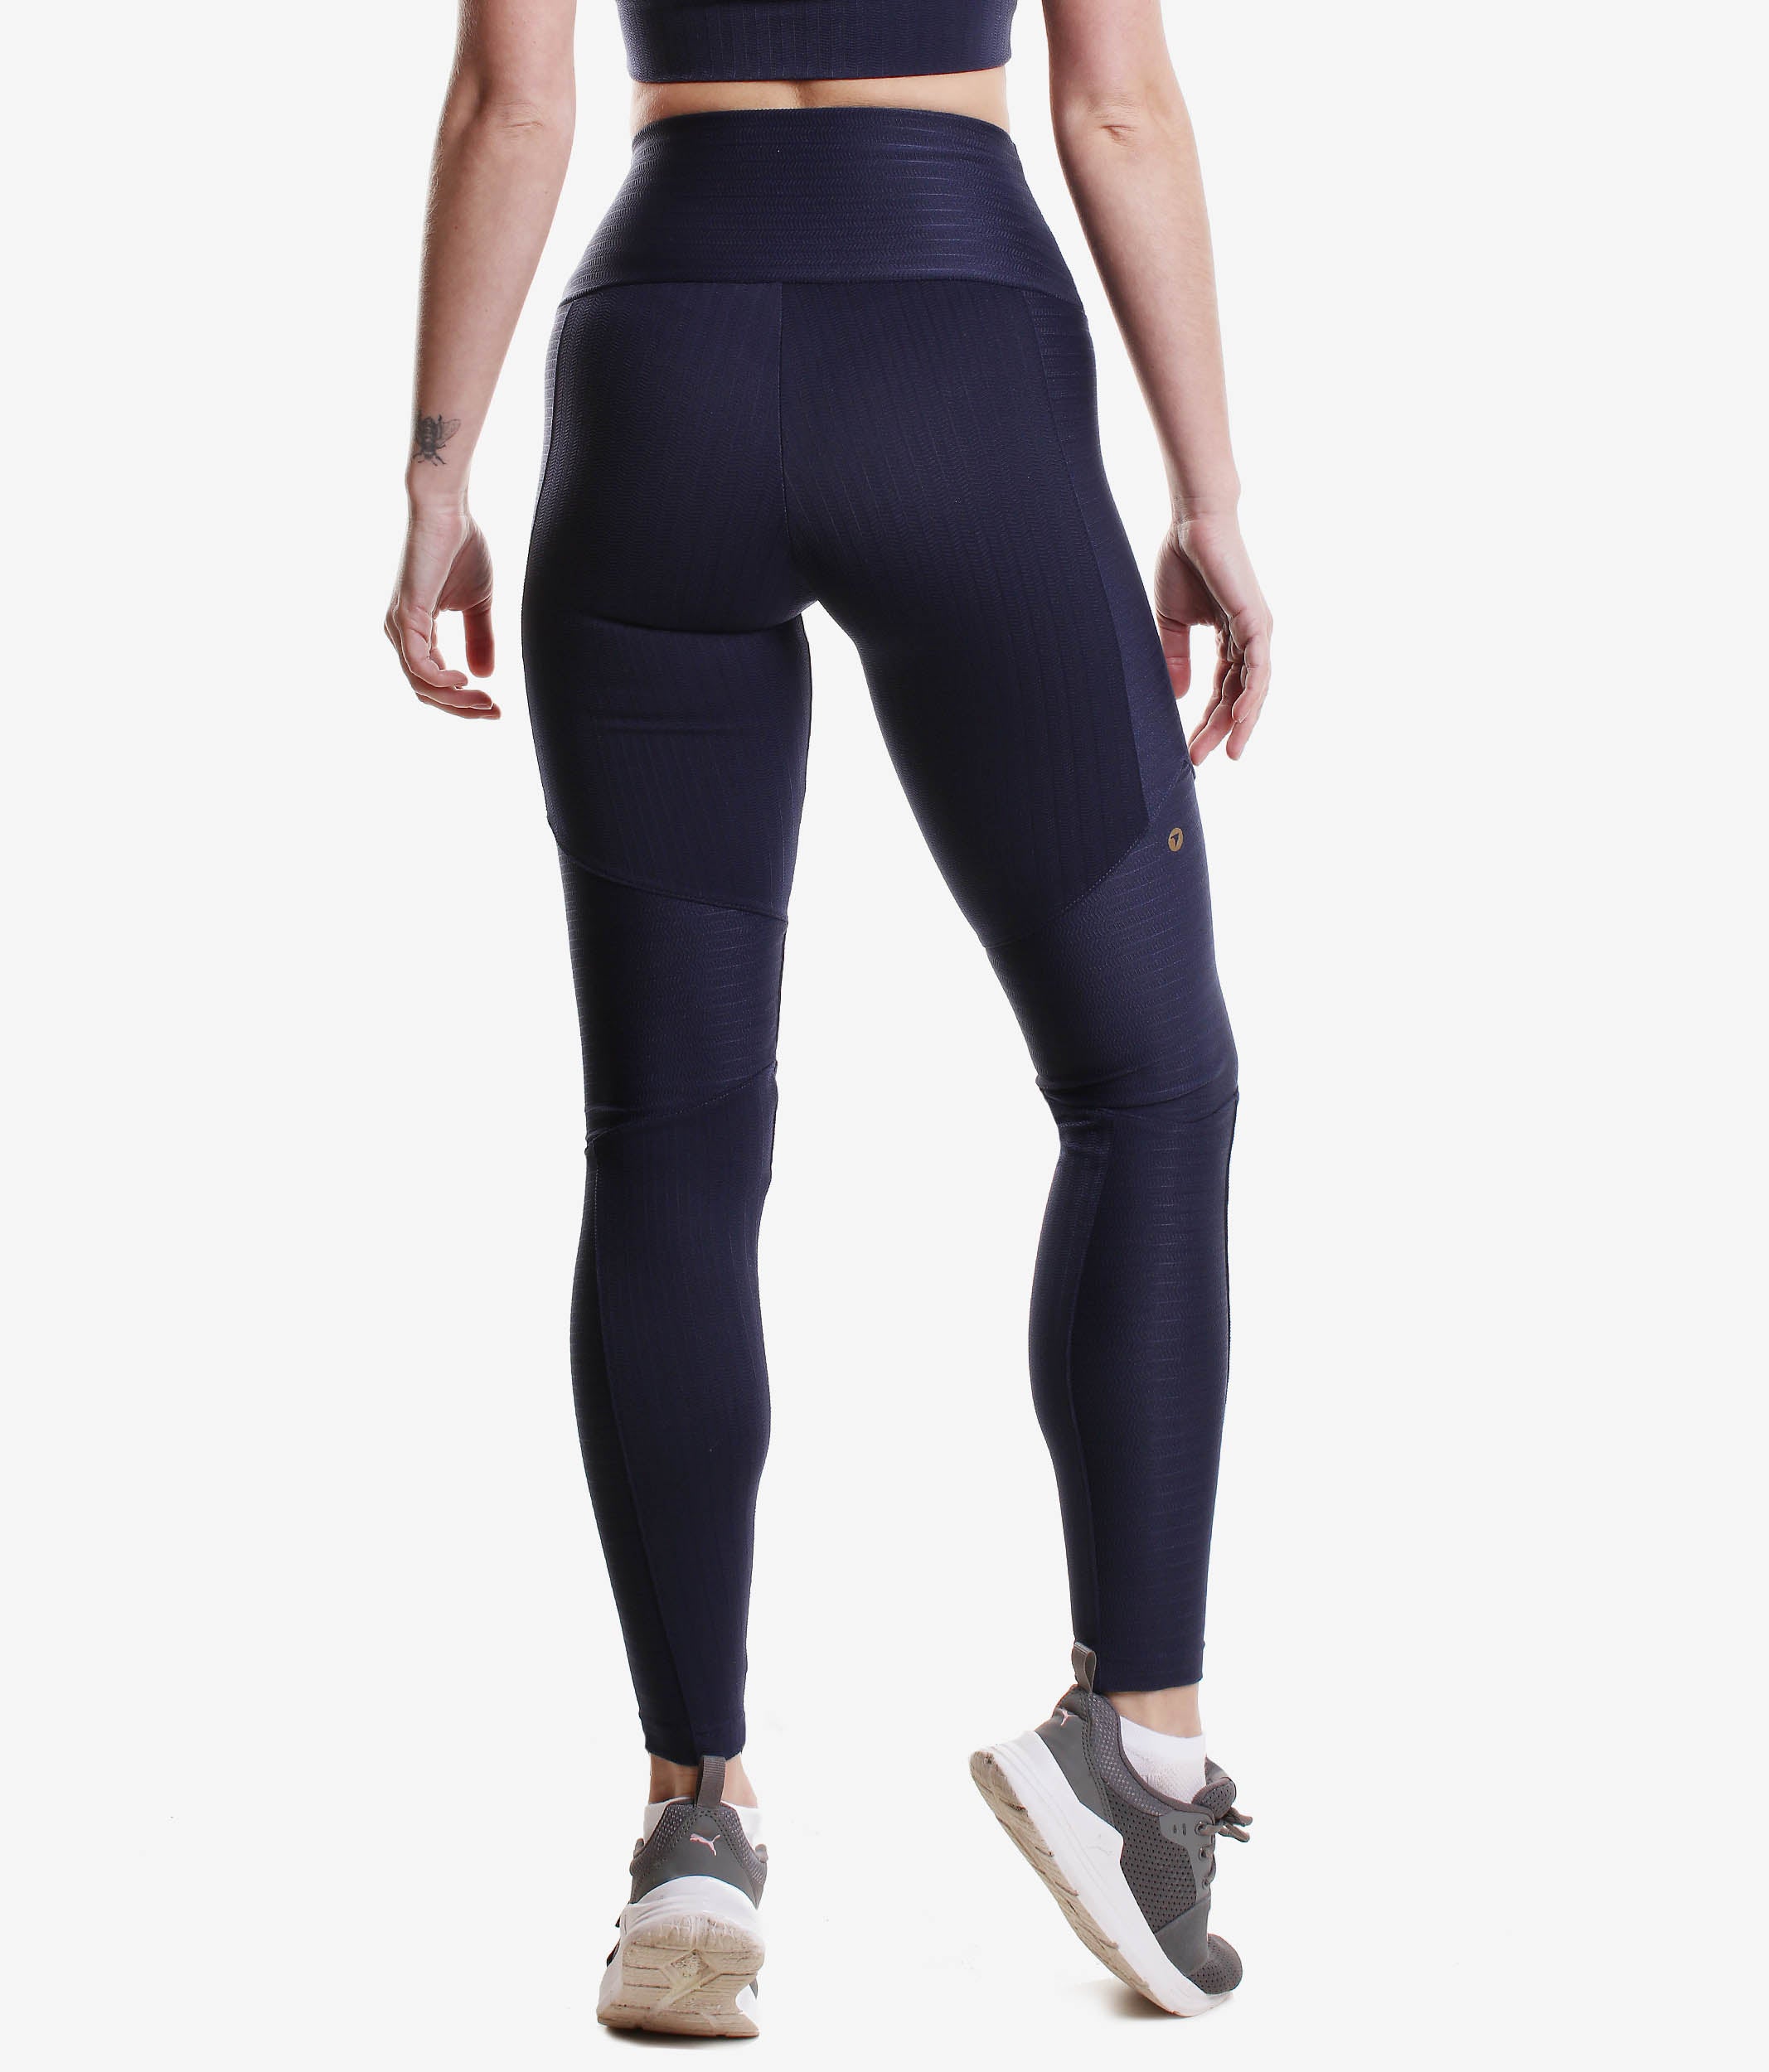 Trinys Compression And Elasticity Leggings, Activewear - Dance World